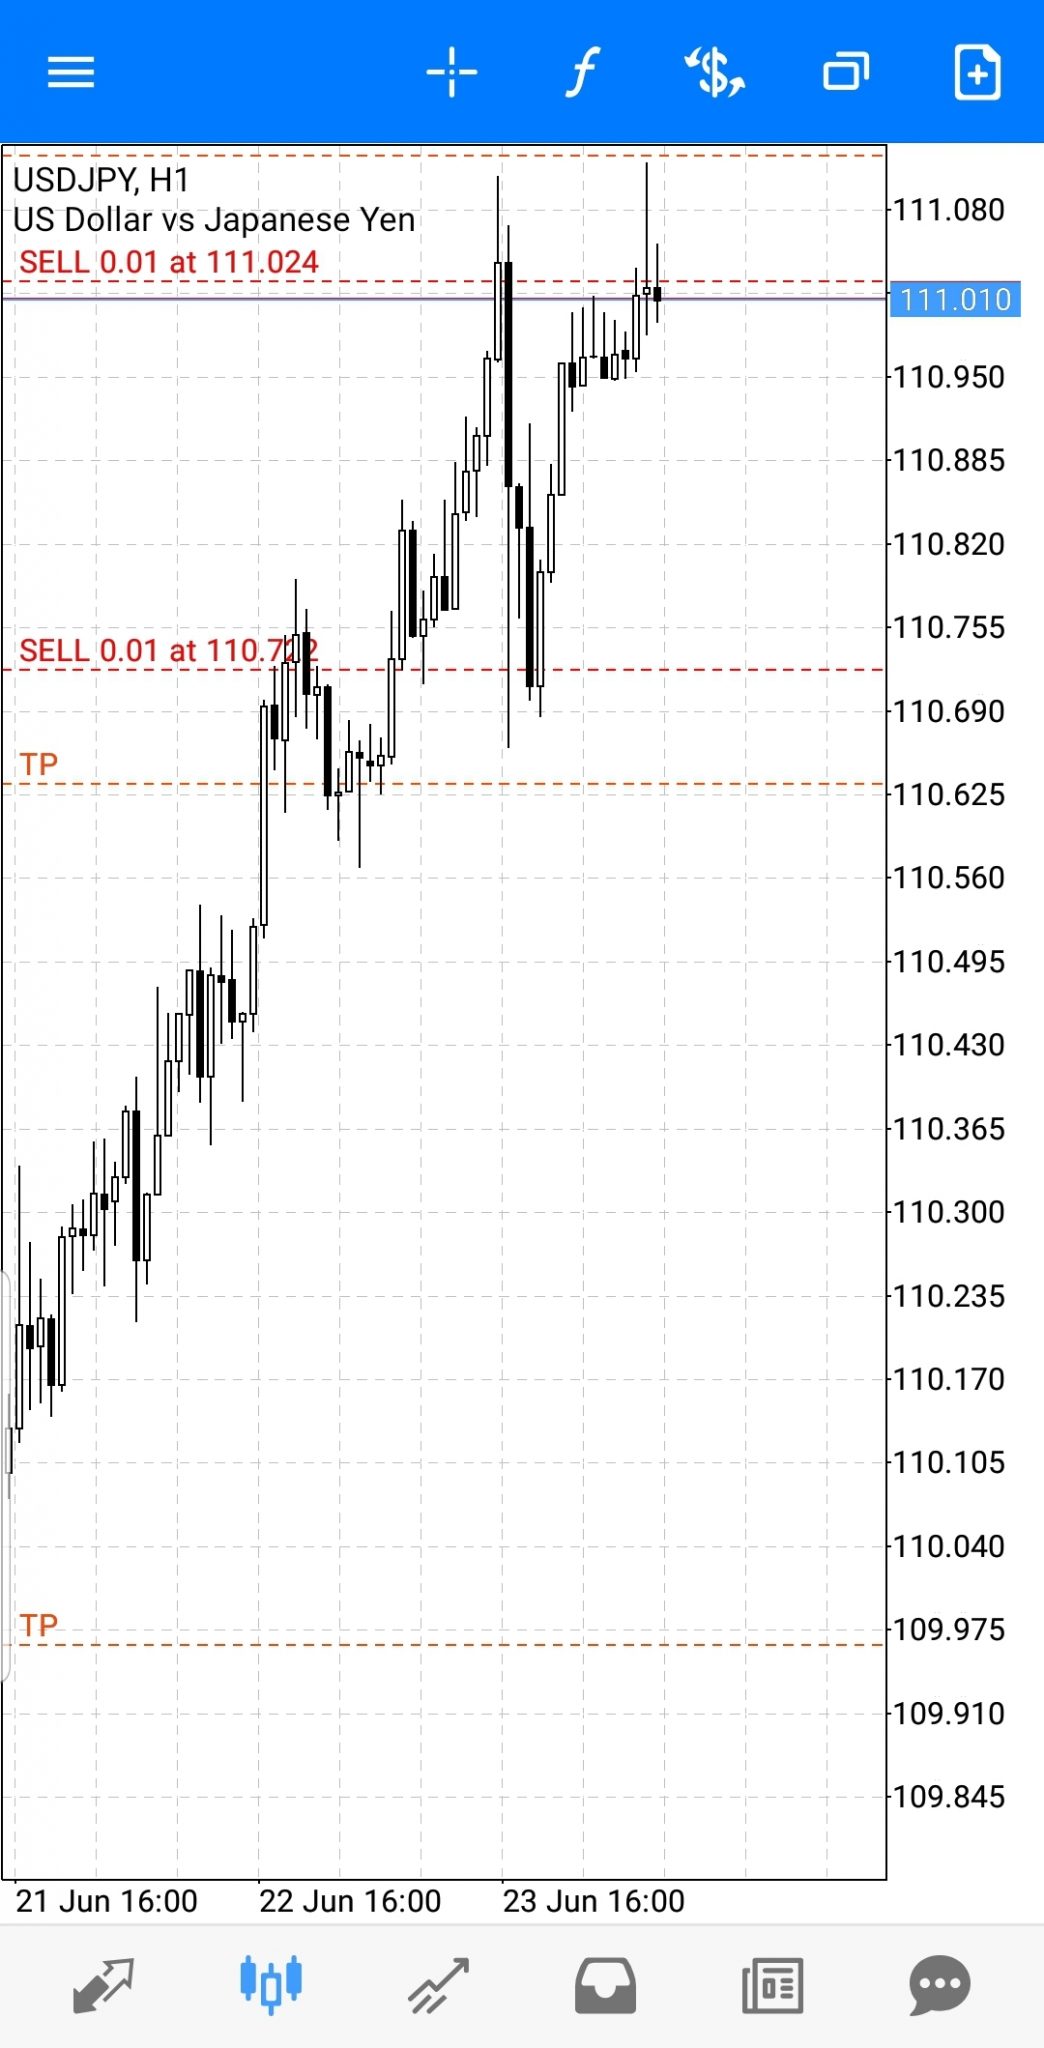 USD/JPY H1 Double top